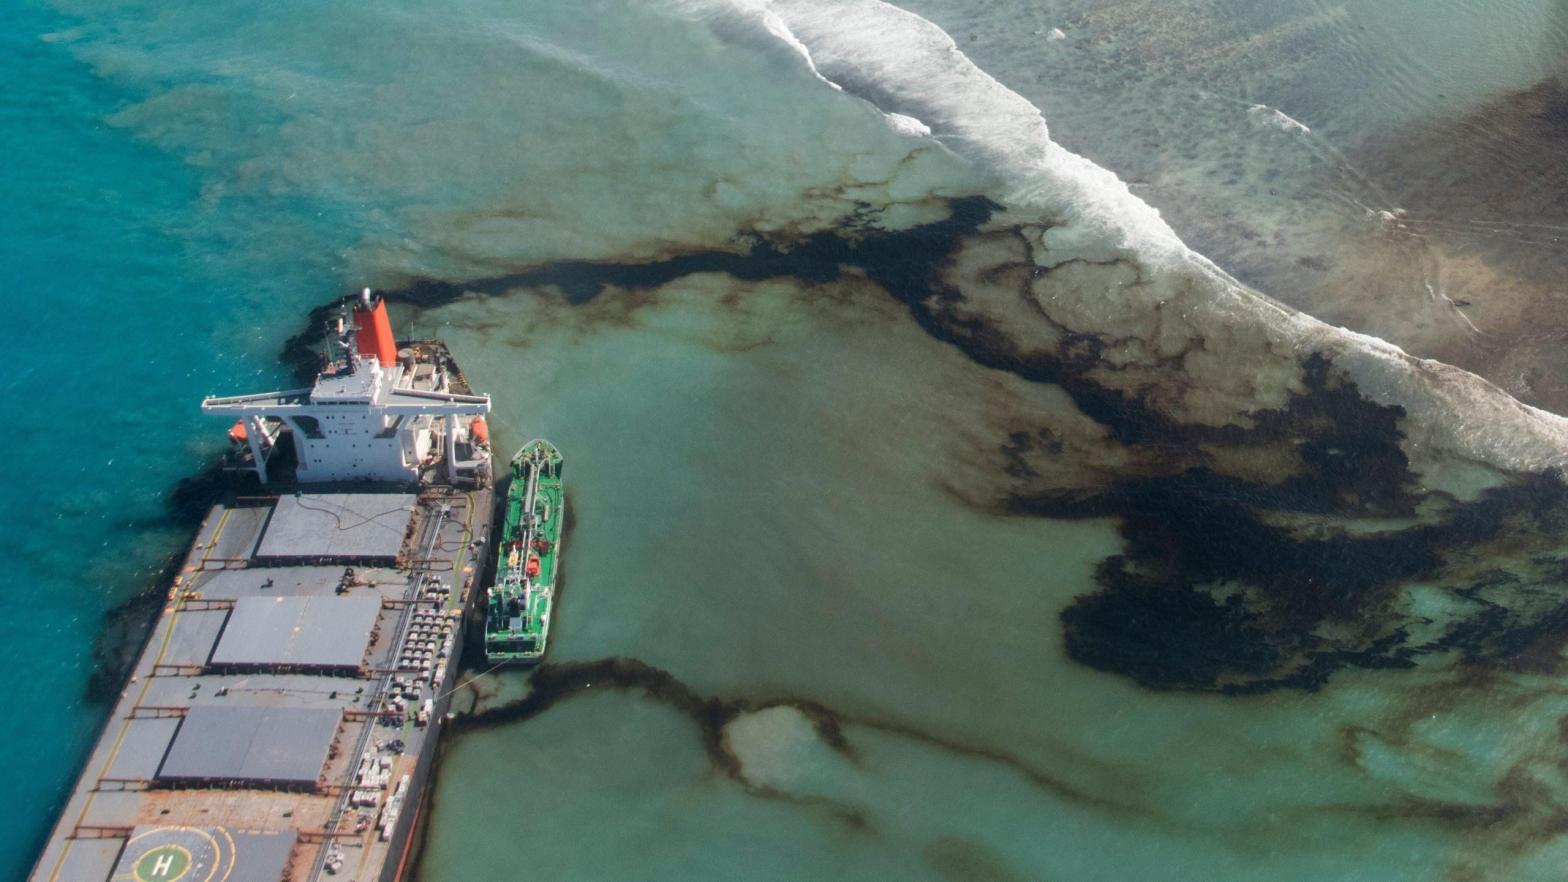 Oil leaks from the MV Wakashio, a bulk carrier ship that ran aground on a coral reef off the southeast coast of Mauritius, last August. (Photo: Gwendoline Defente/EMAE, AP)